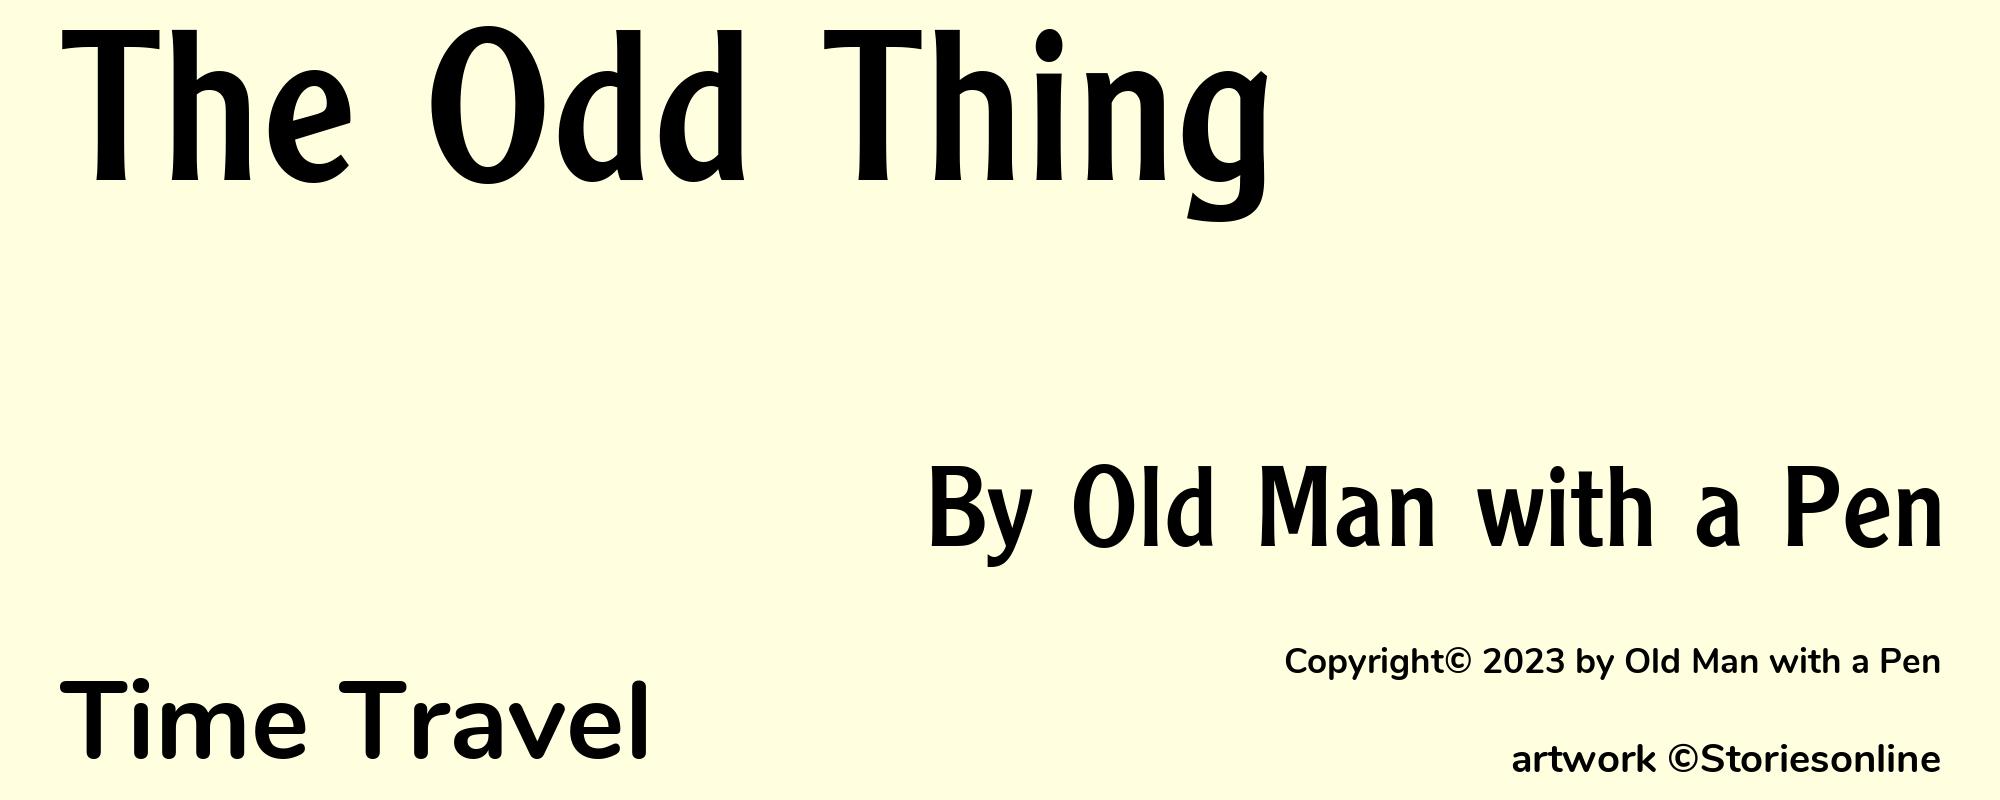 The Odd Thing - Cover